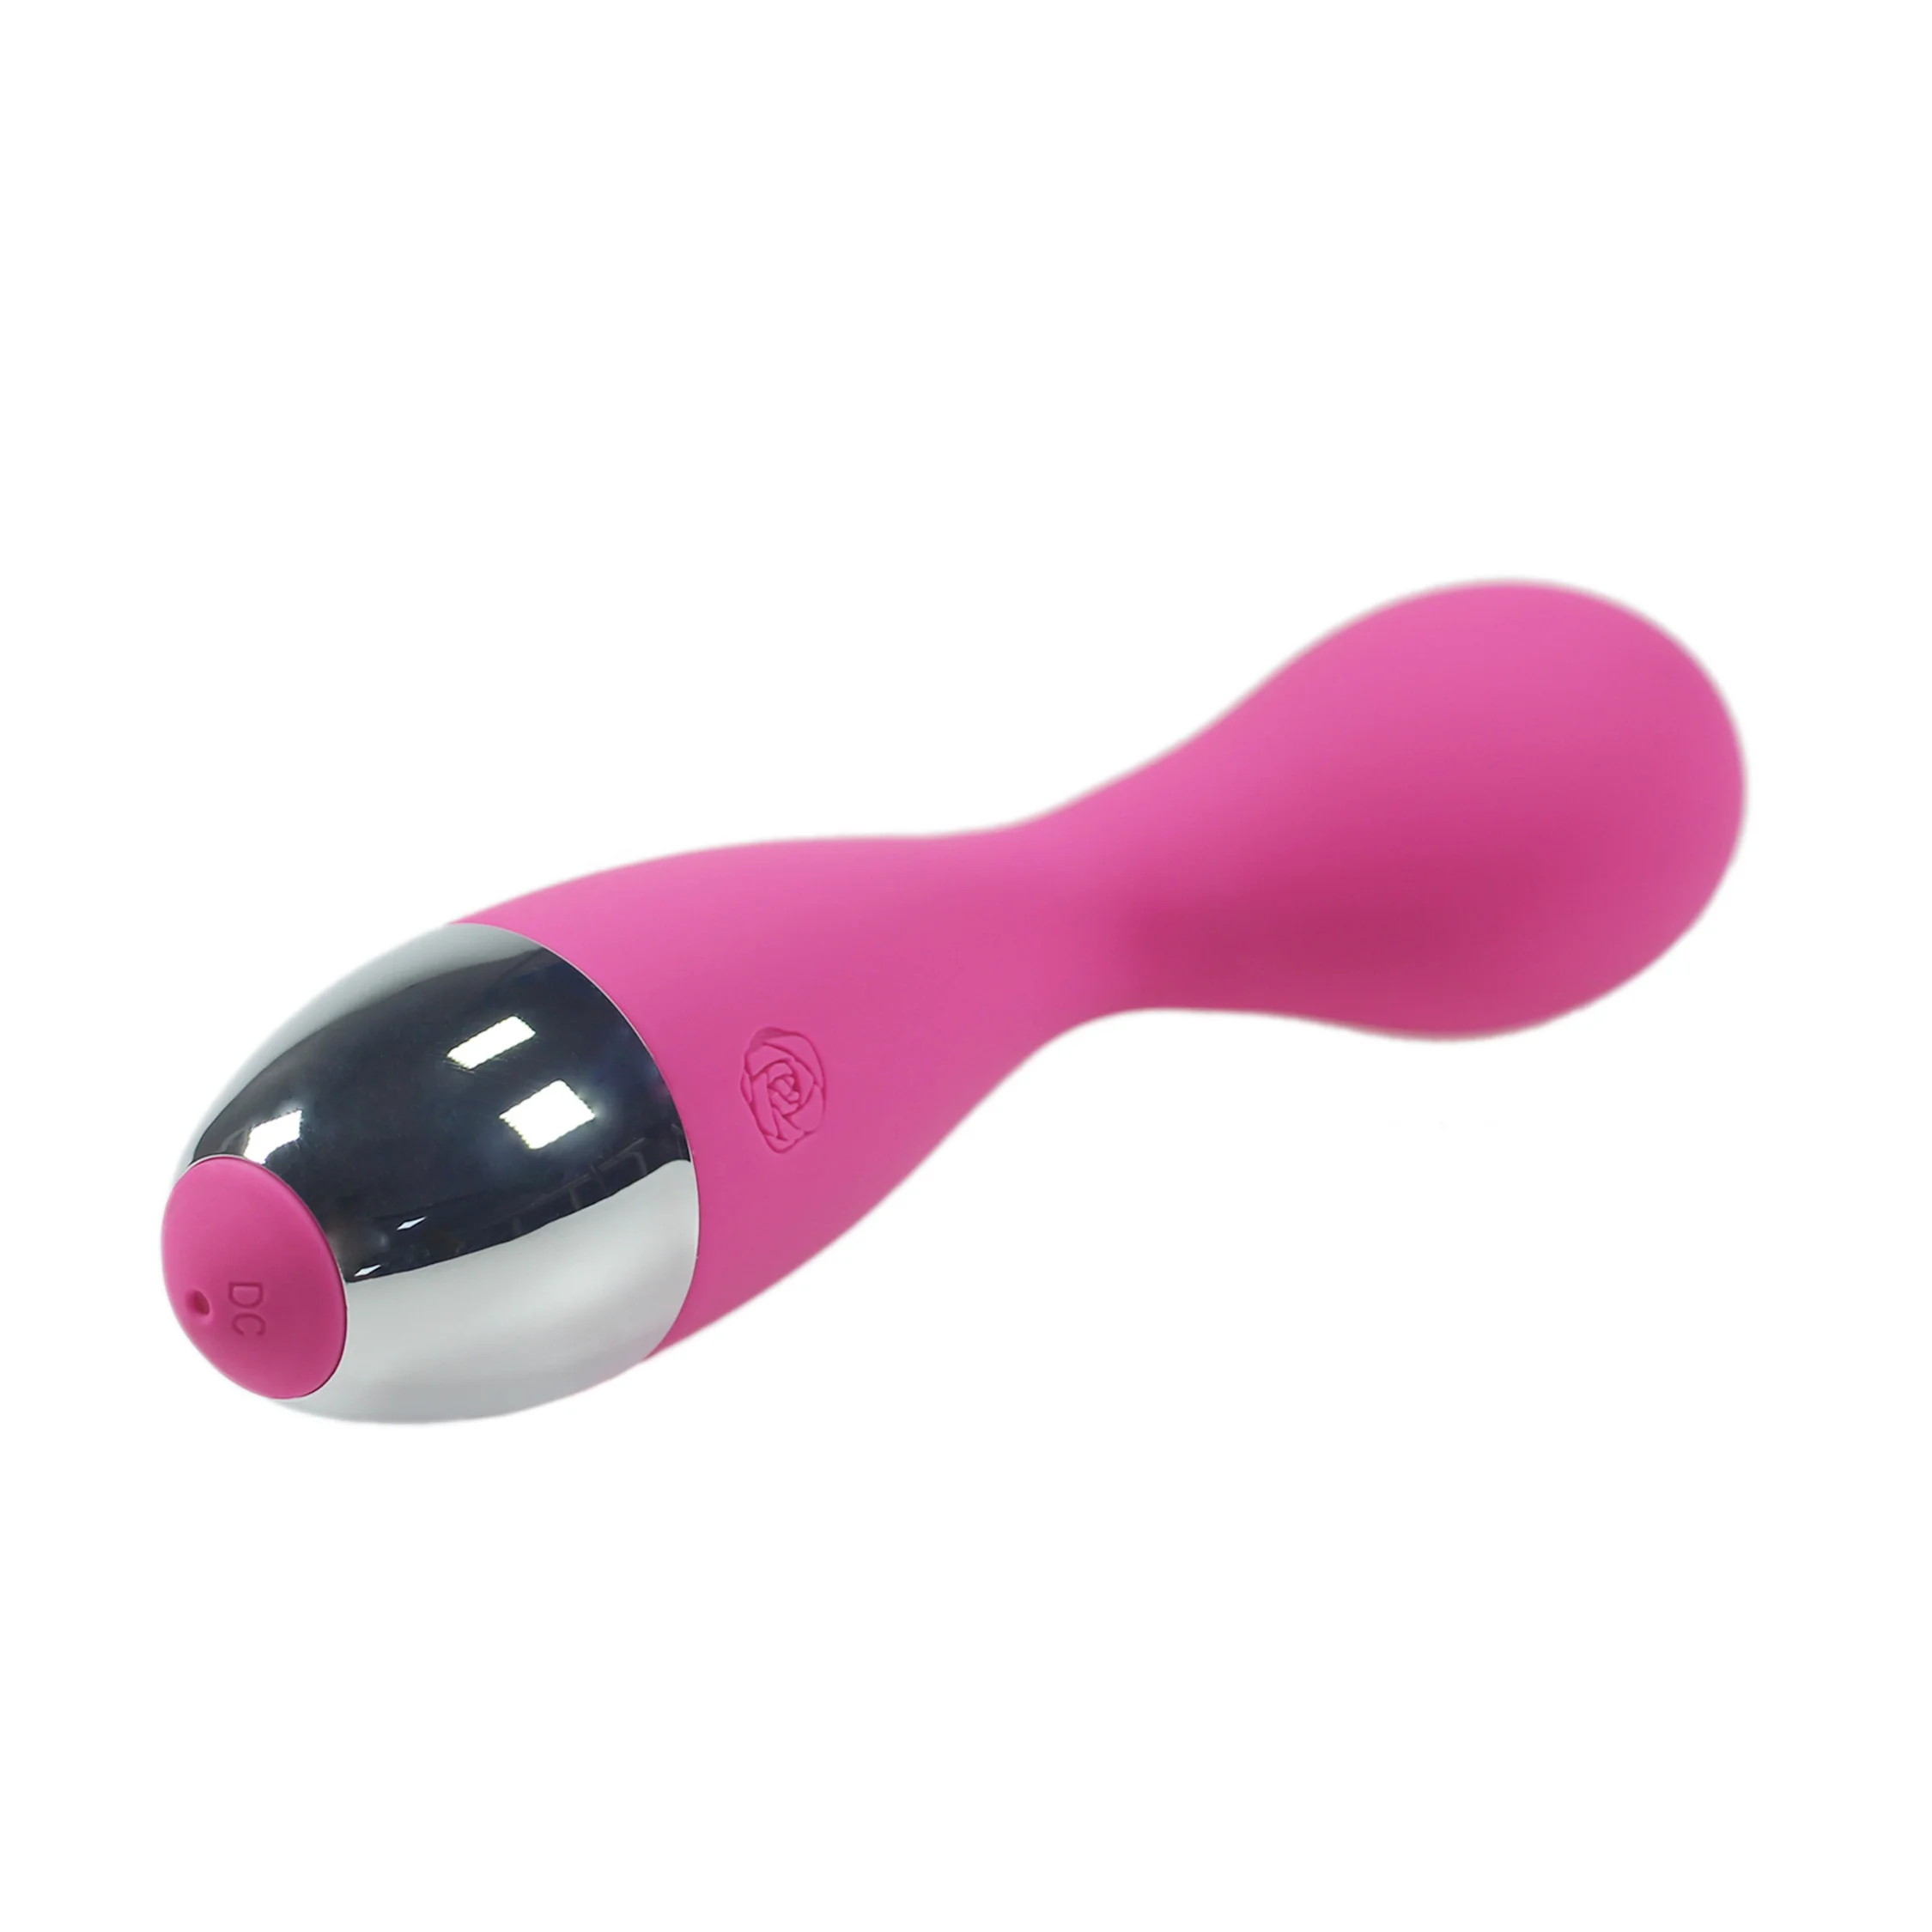 Stranger vaccination With other bands Rechargeable Electric Sex Toys Mini Vibrator For Women - Buy Electric  Vibrators For Women,Mini Personal Vibrator,Vibrator Toys For Ladies Product  on Alibaba.com